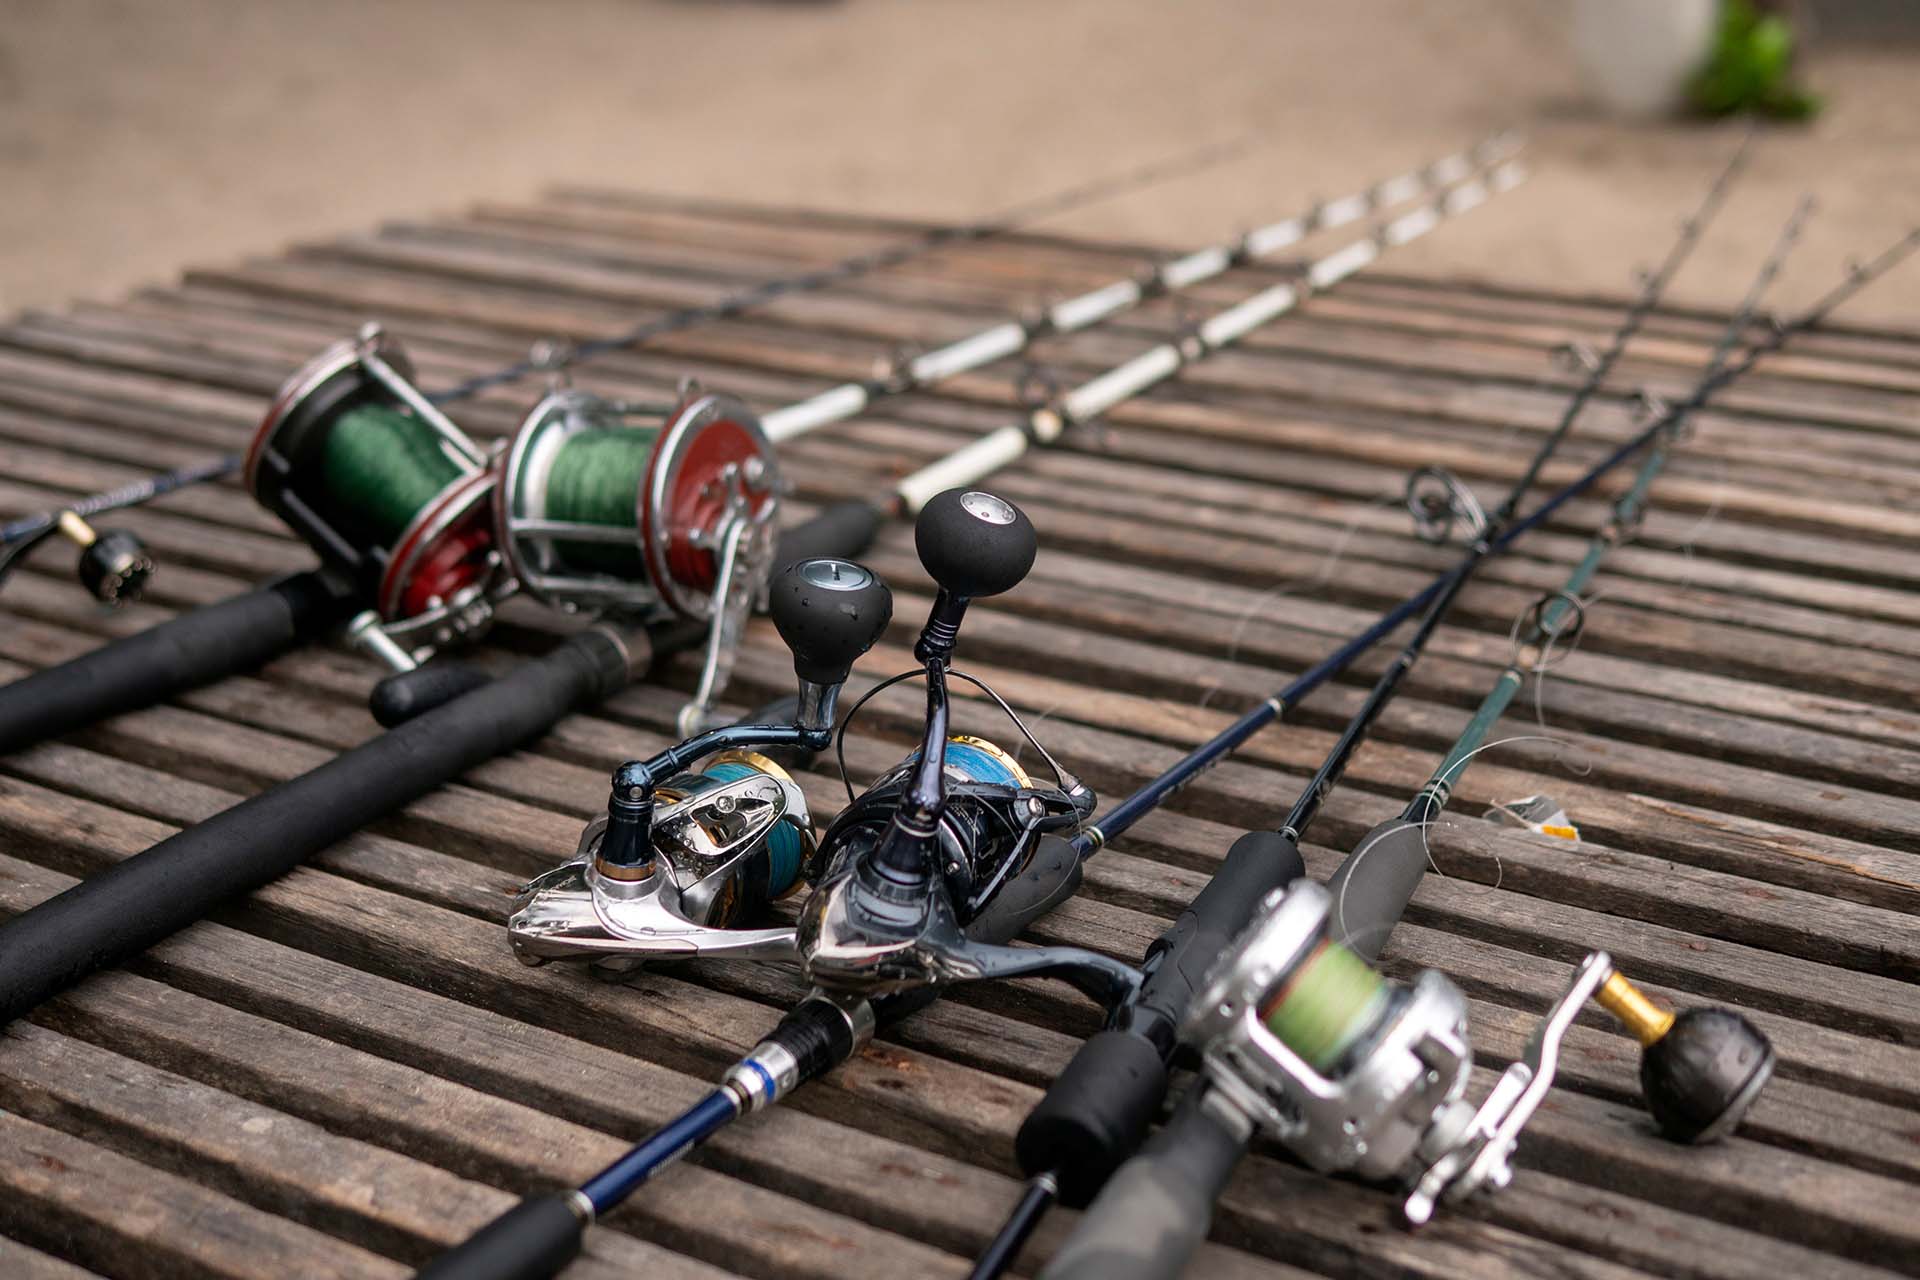 Fishing rods and reels on a wooden deck